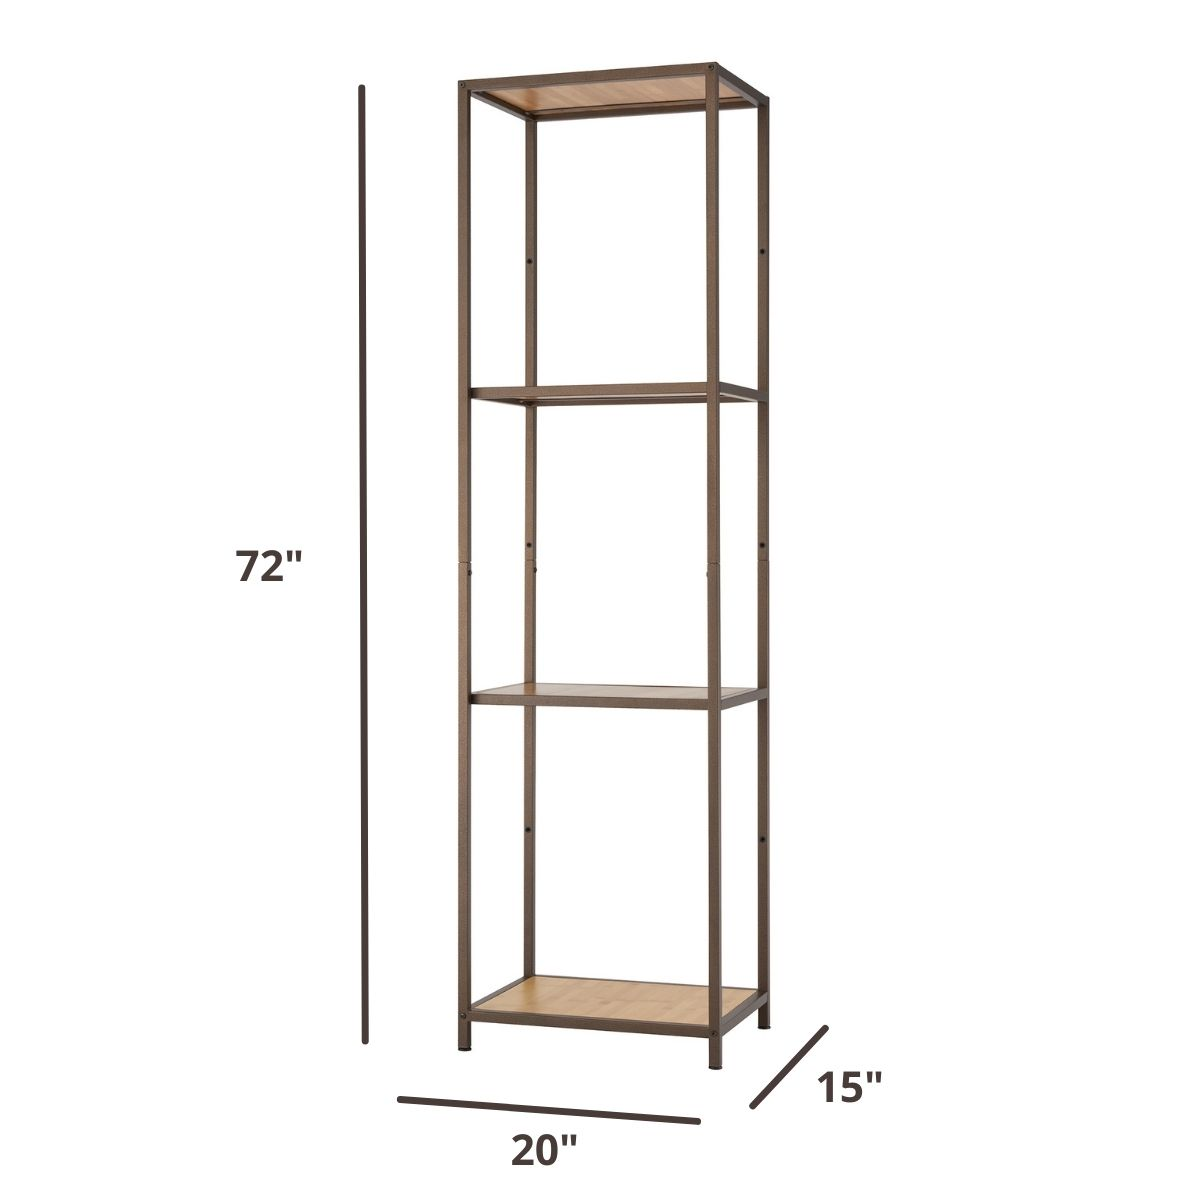 72 inches tall by 20 inches wide by 15 inches deep shelving tower in bronze color